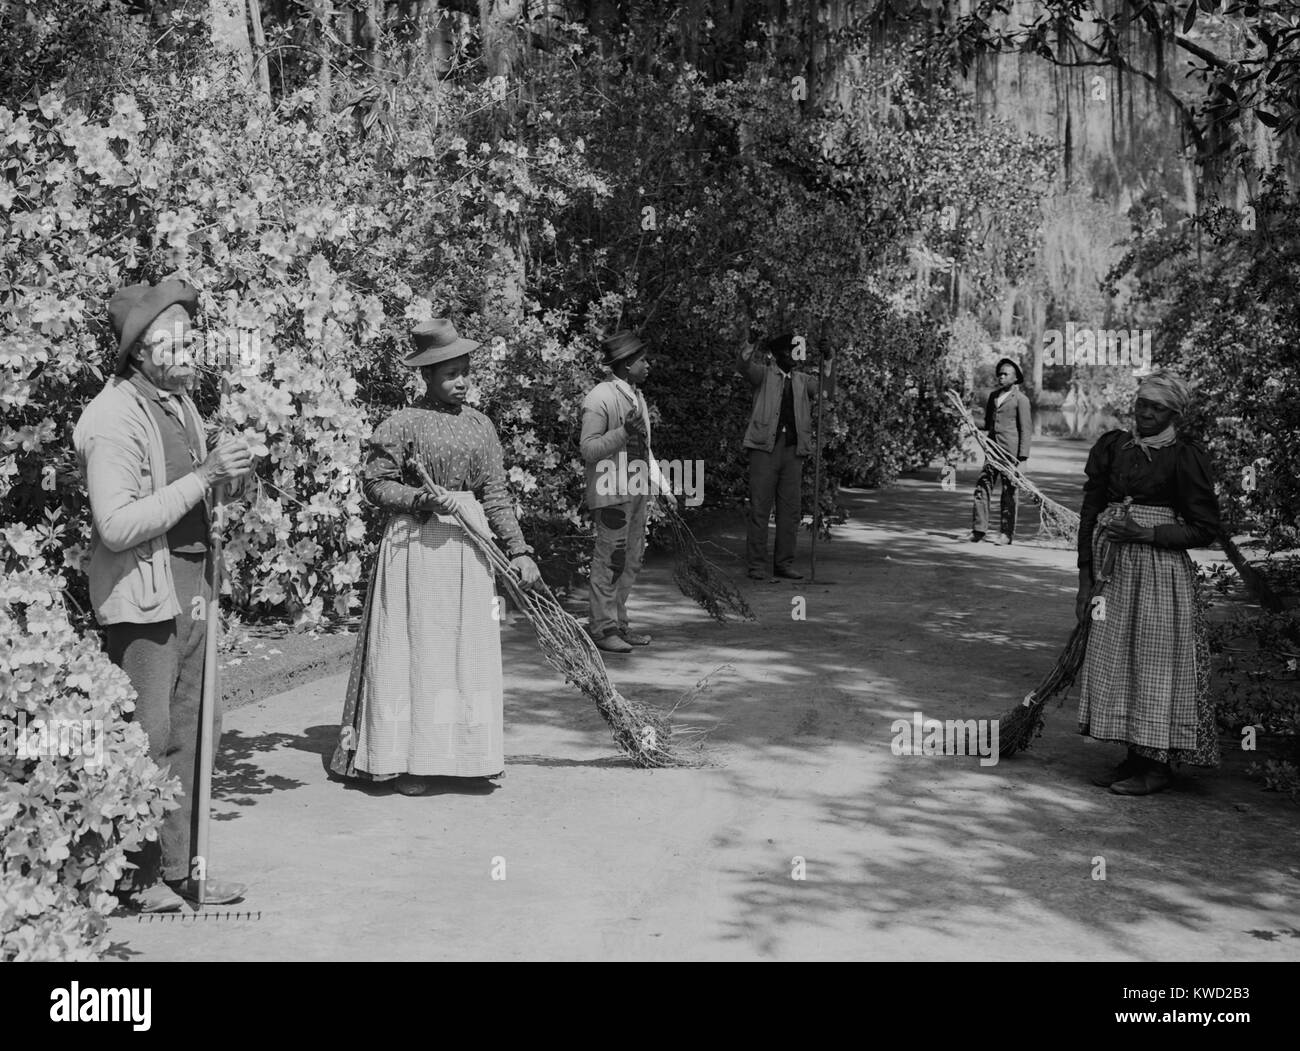 African American caretakers at the Magnolia Plantation and Gardens in Charleston, SC. The sweepers hold crude brooms made of twigs. After the Civil War, the Drayton family gardens were opened to the public to earn money as a tourist attraction. Photo by Jackson, William Henry  (BSLOC 2017 20 99) Stock Photo